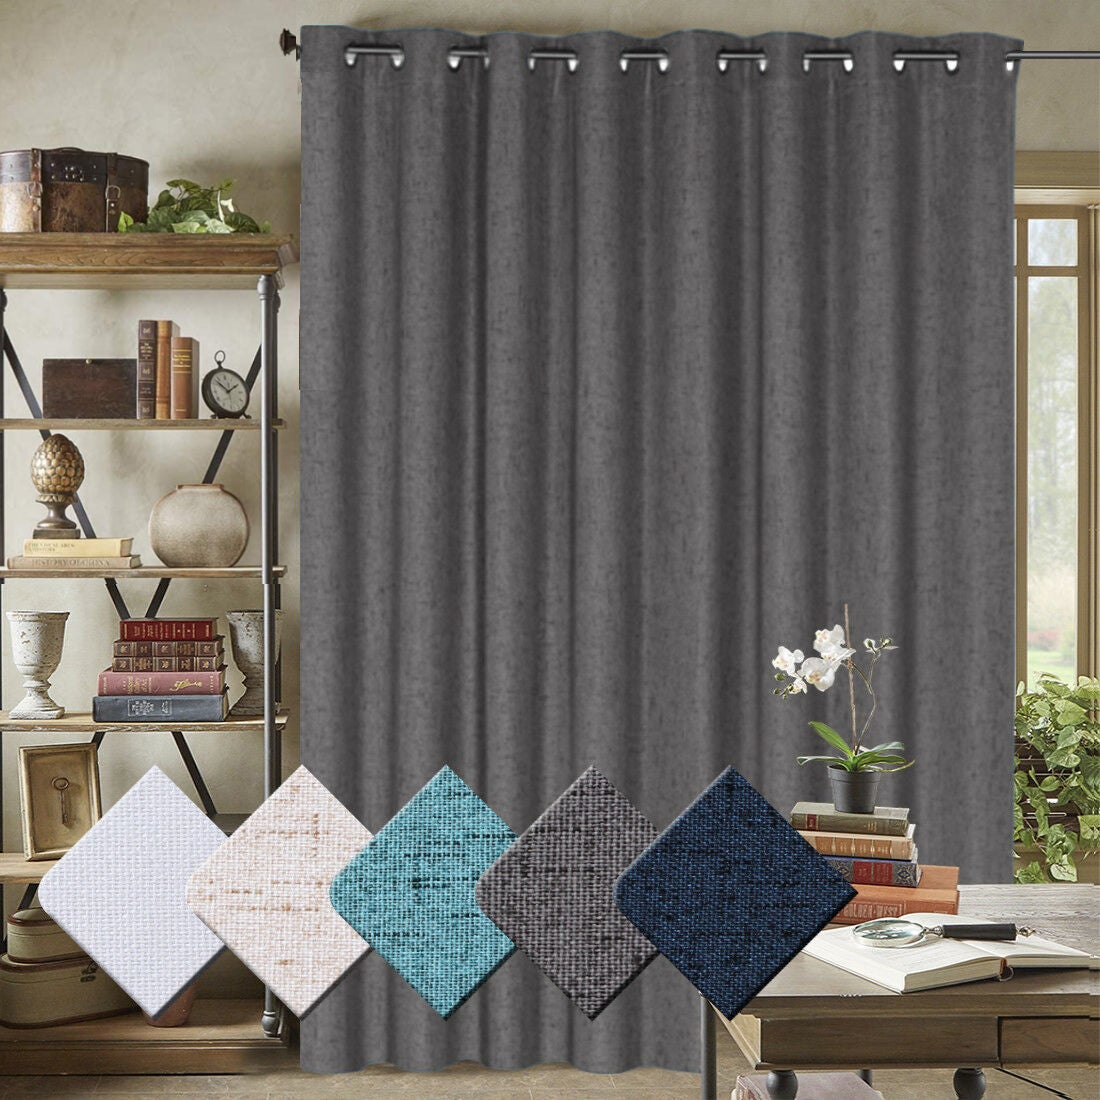 100% Blackout Curtains for Bedroom Linen Textured Double Wide Blockout Curtains